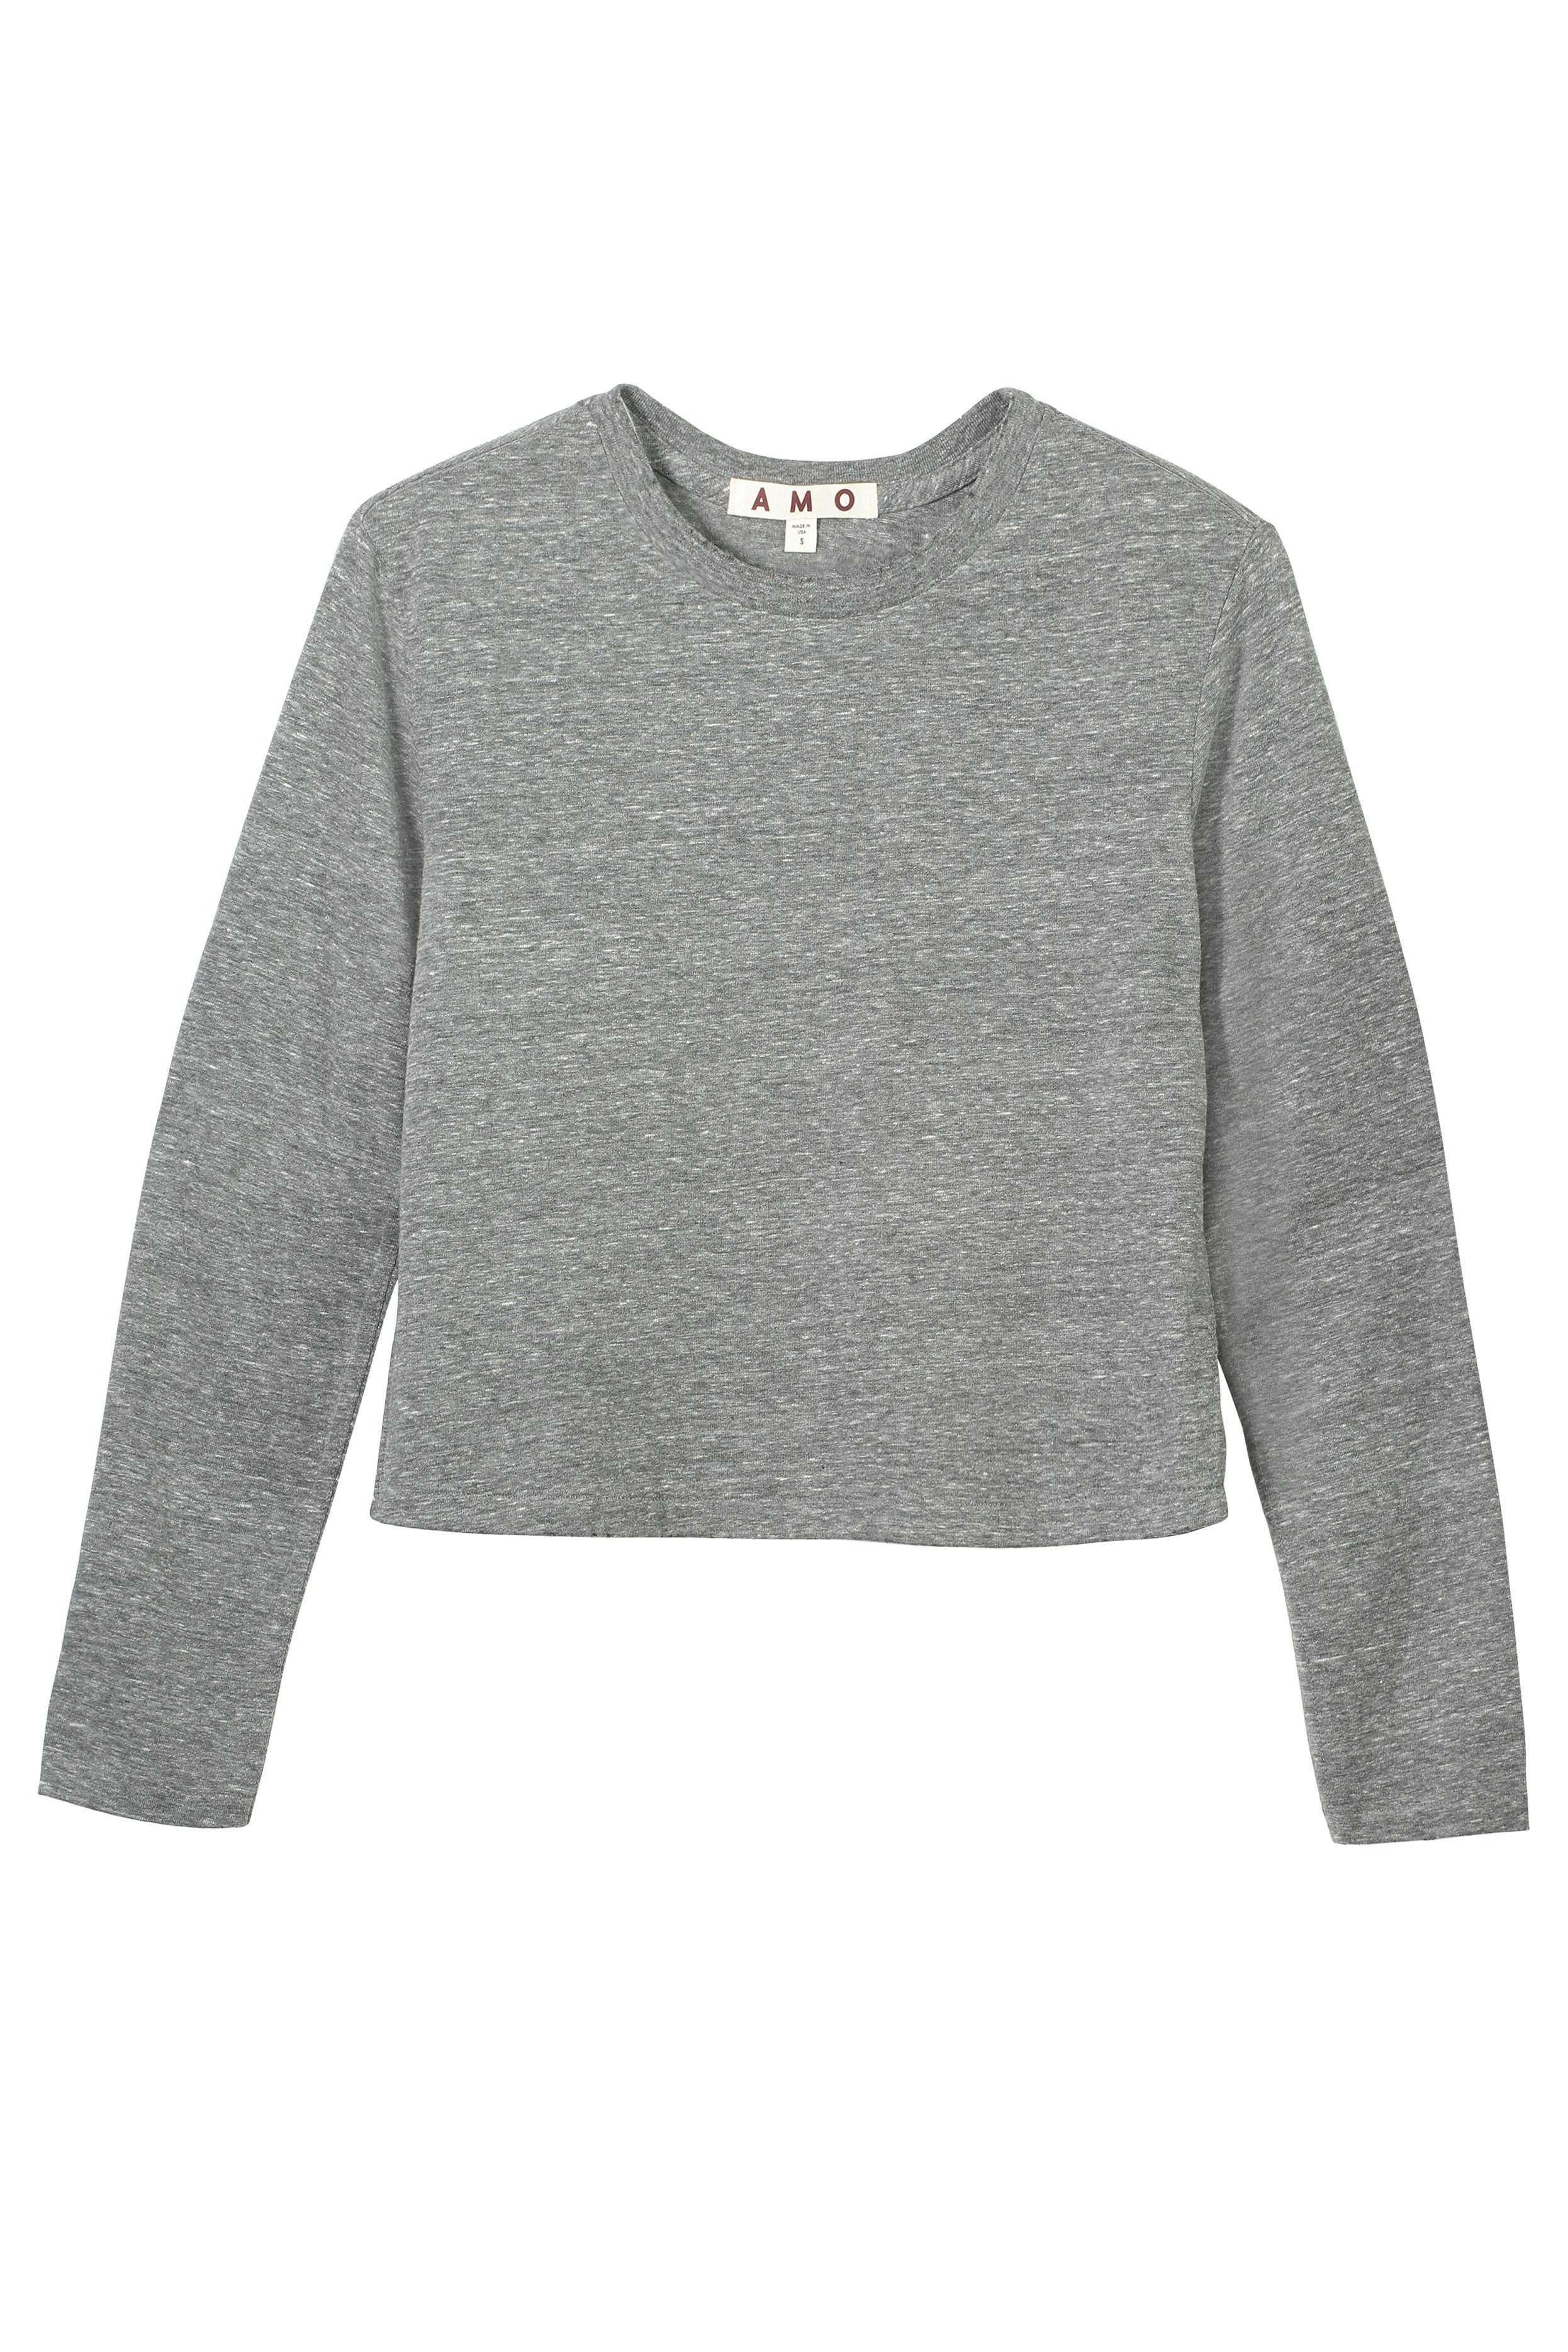 L/S Babe Tee in Heather Grey